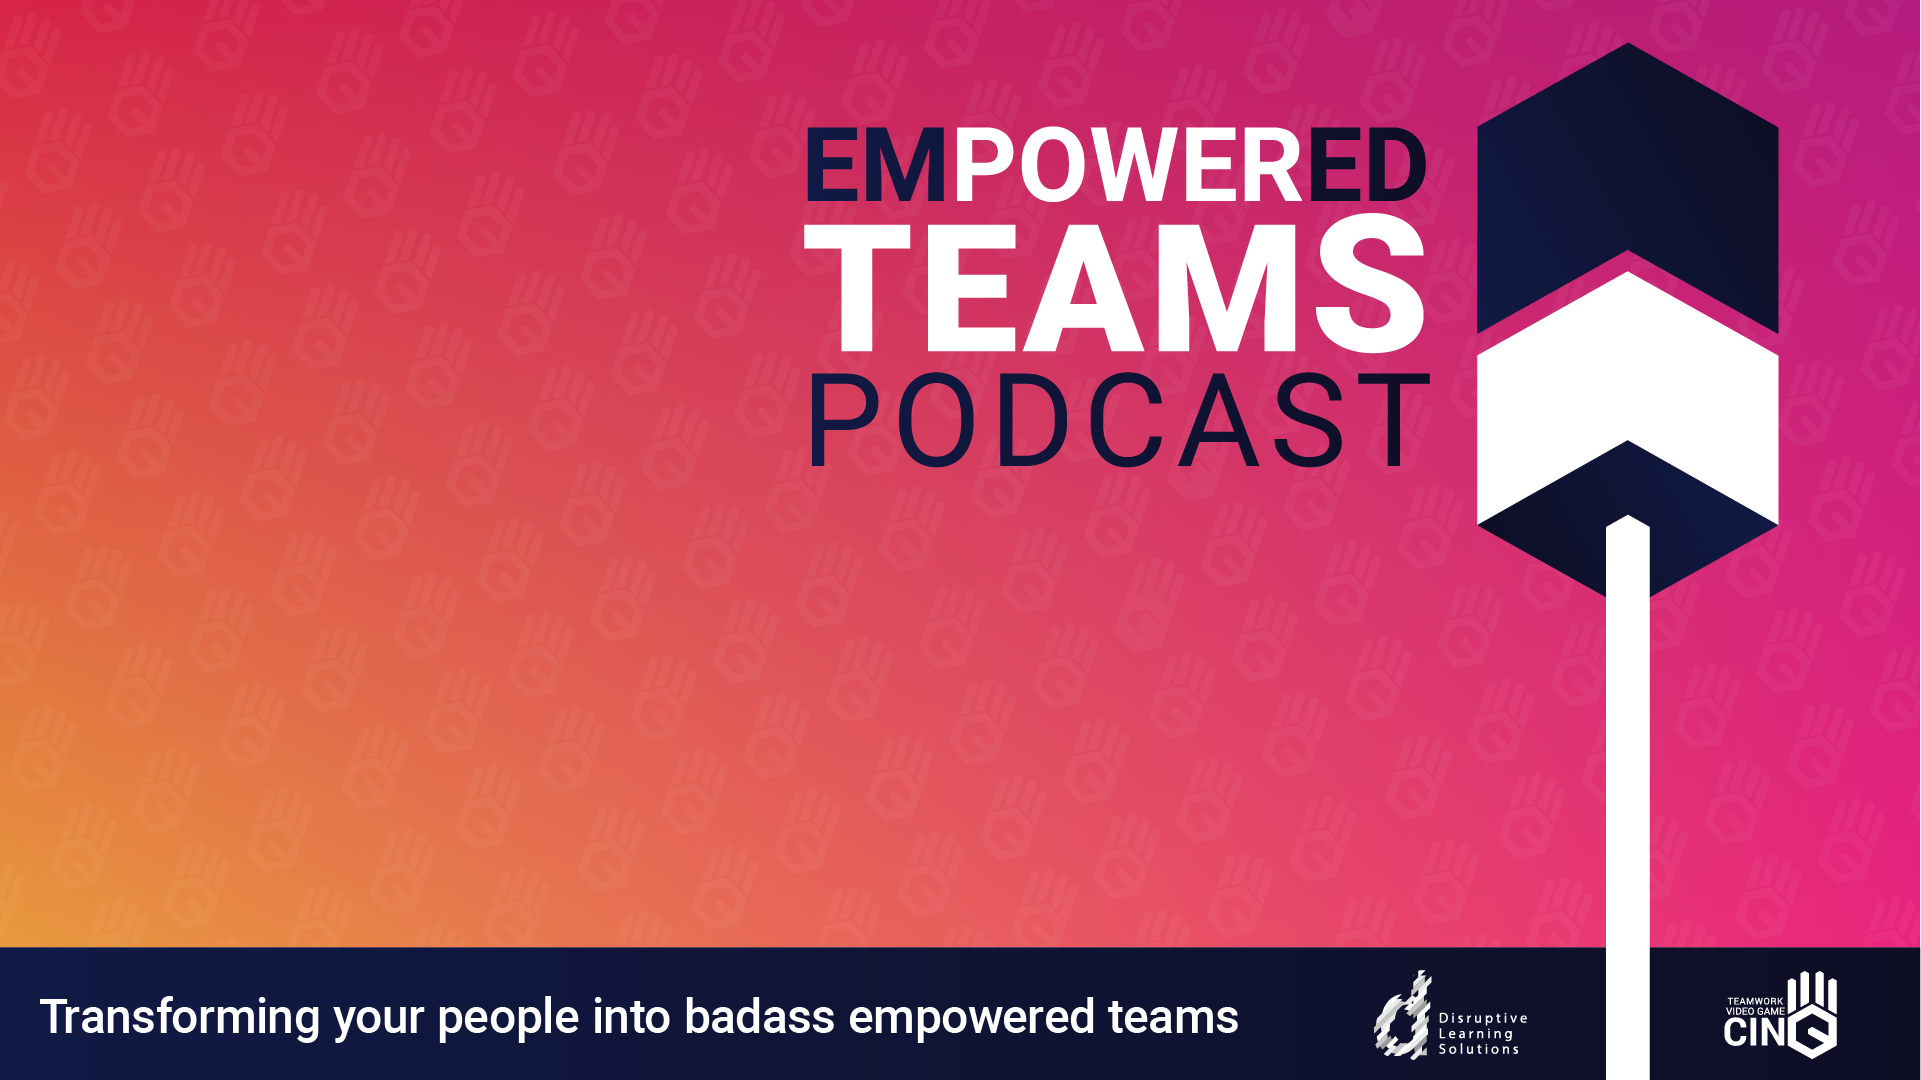 [CinQ Empowered Teams Podcast]